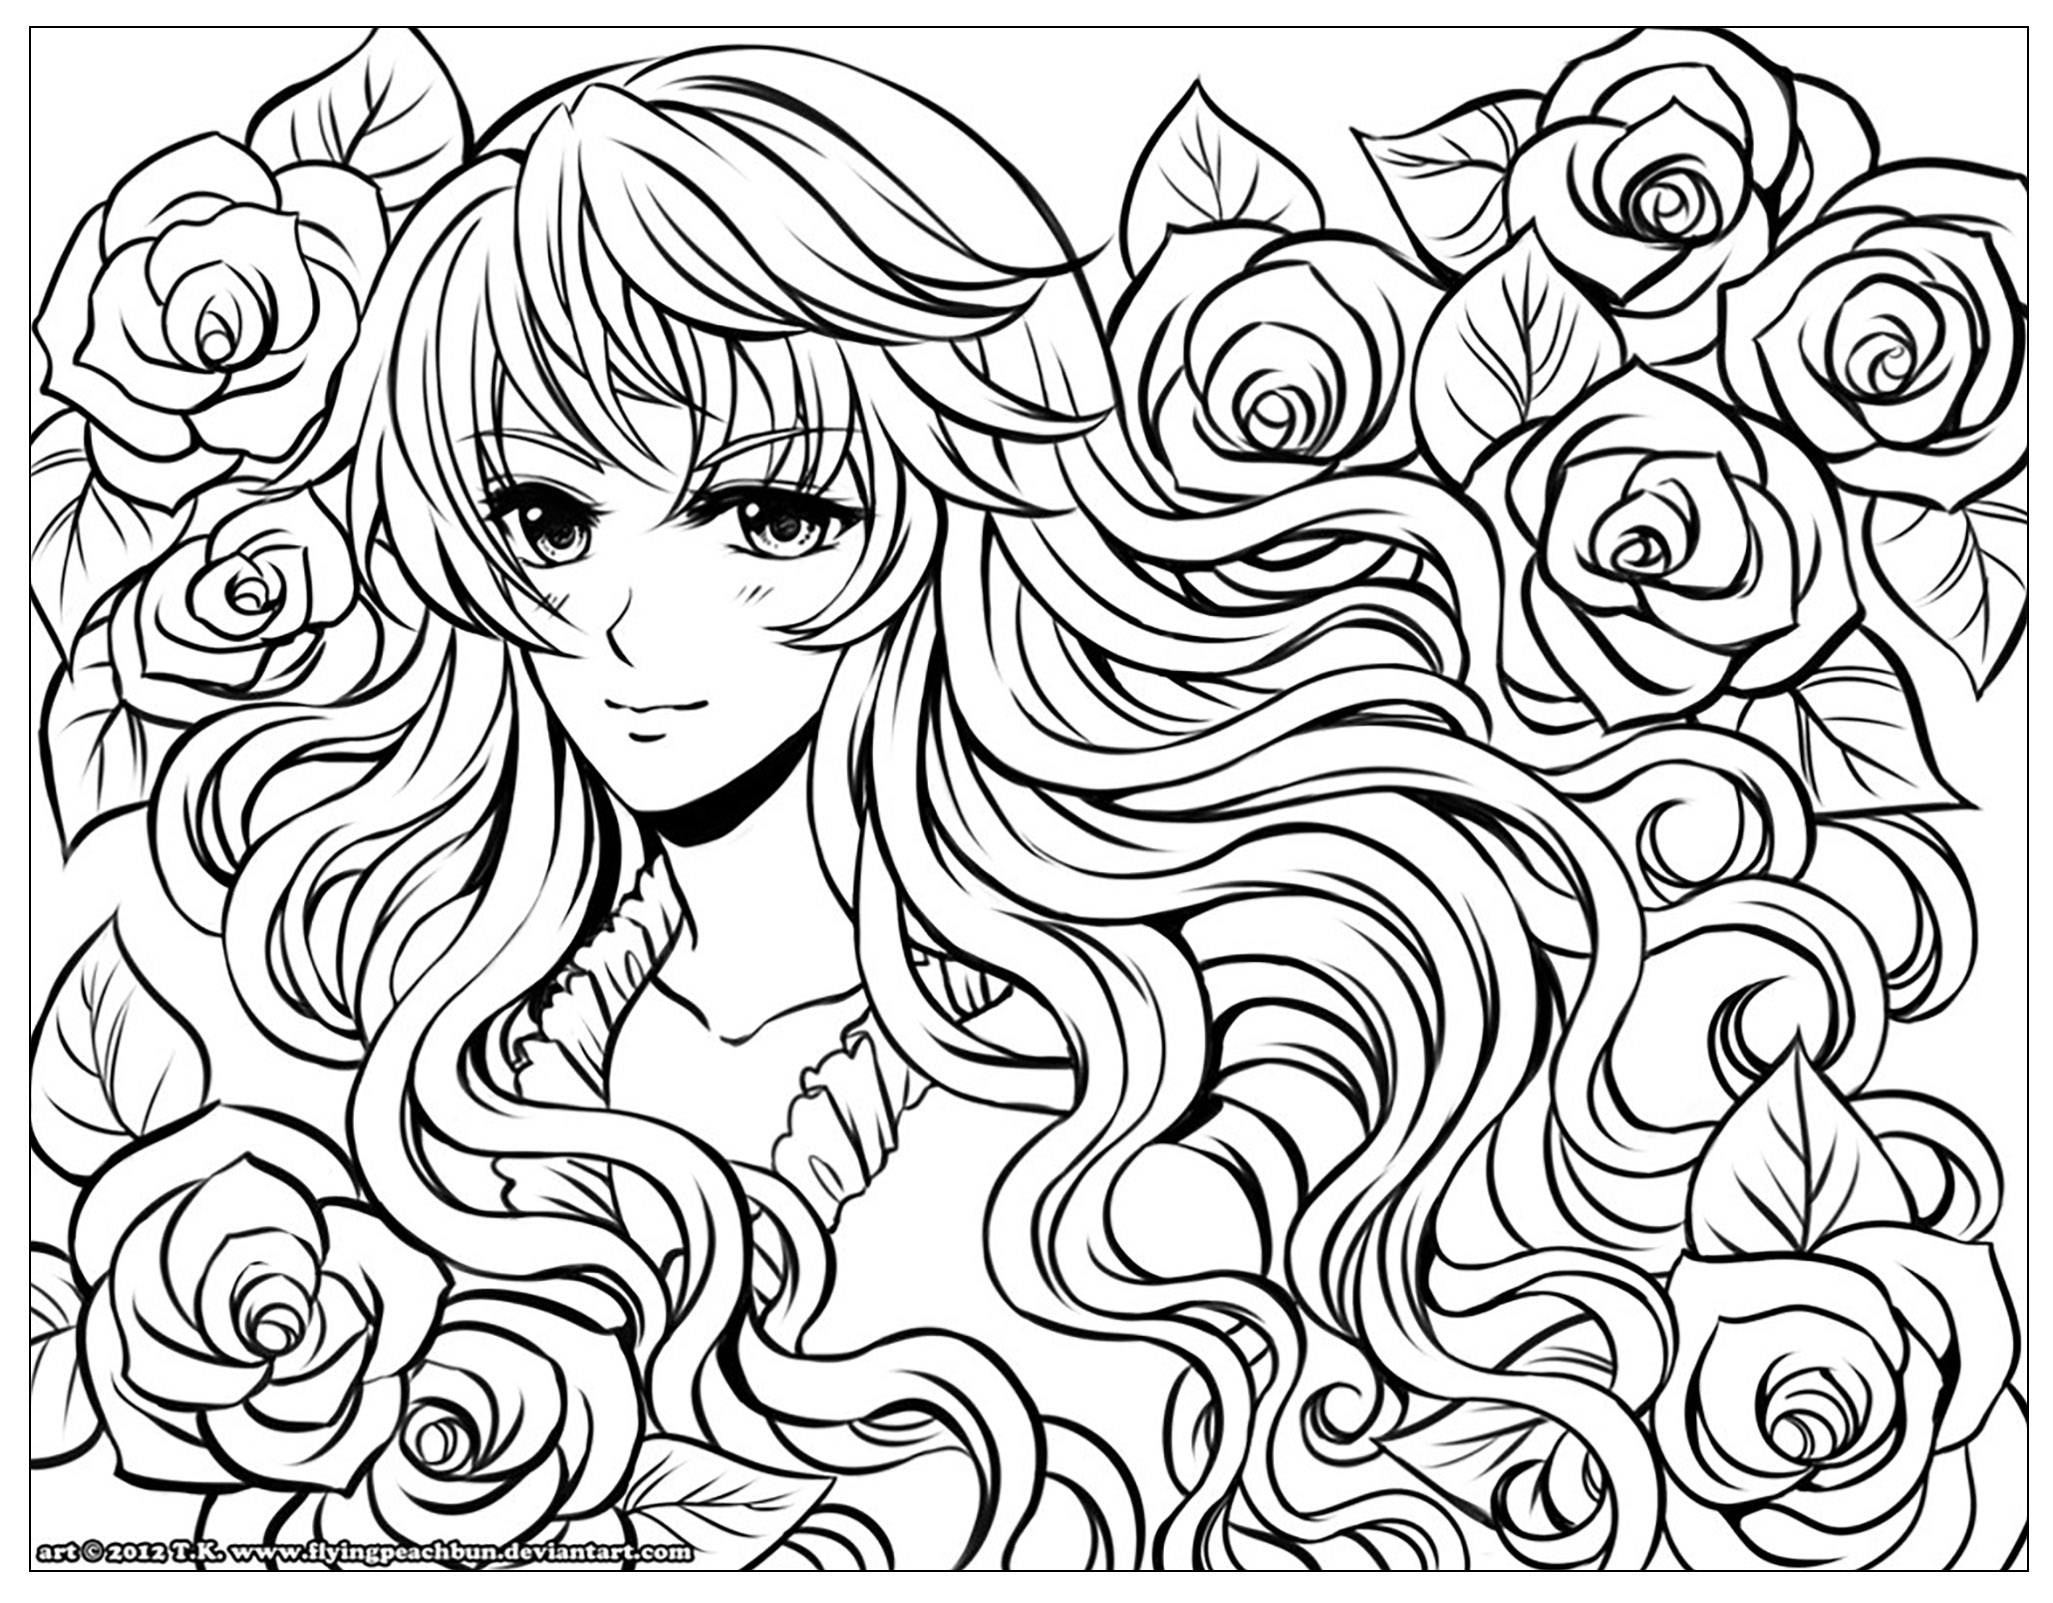 Cute Anime Girl Coloring Page Printable Adult Coloring - Etsy Israel